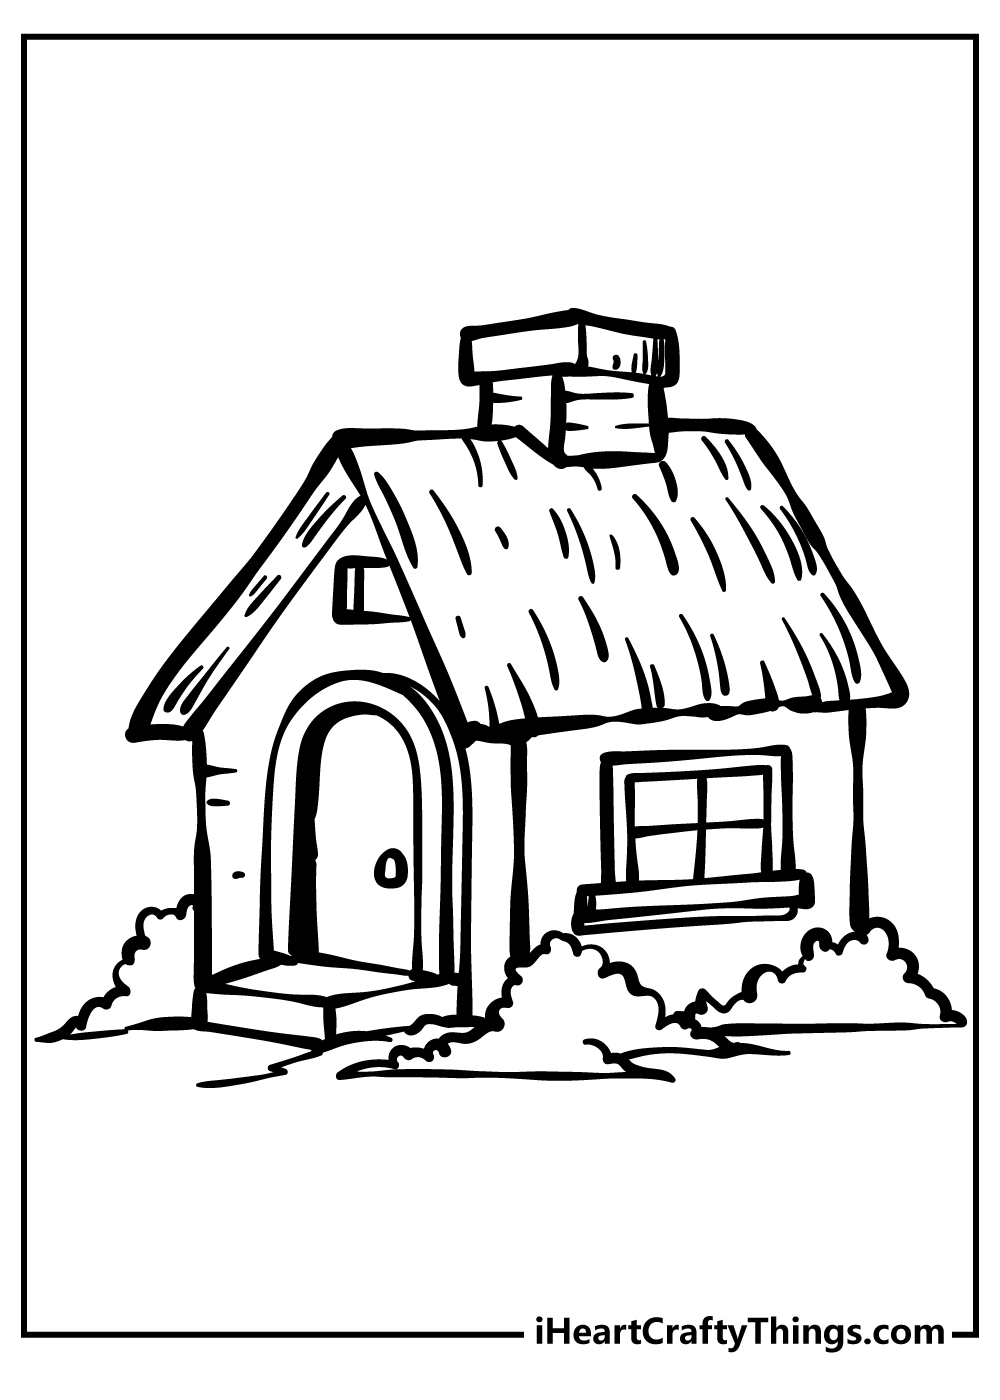 House coloring pages free printable